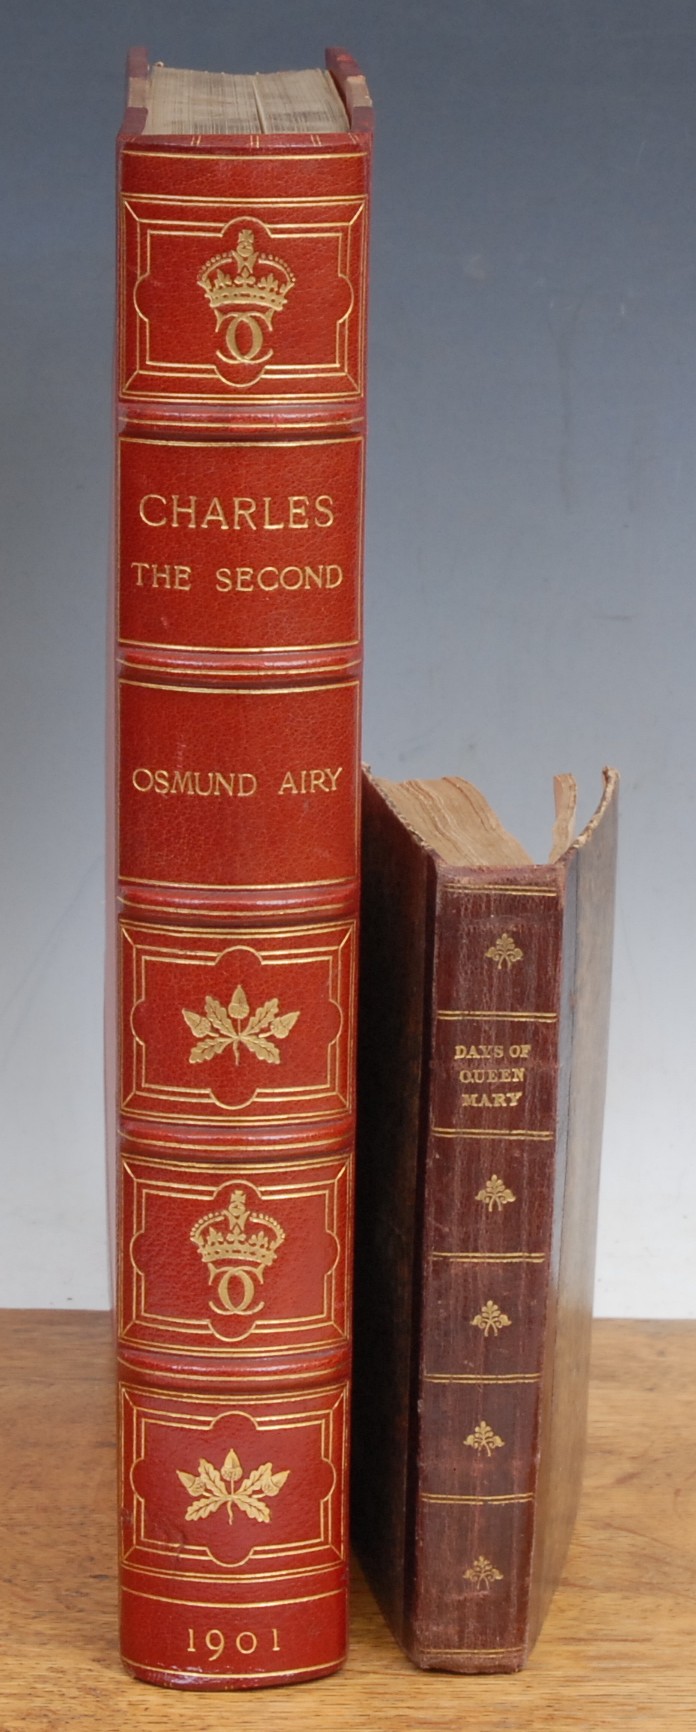 Biography, Royalty – Airy (Osmond, MA, LLD), Charles II, London, Goupil & Co., 1901, large 4to,